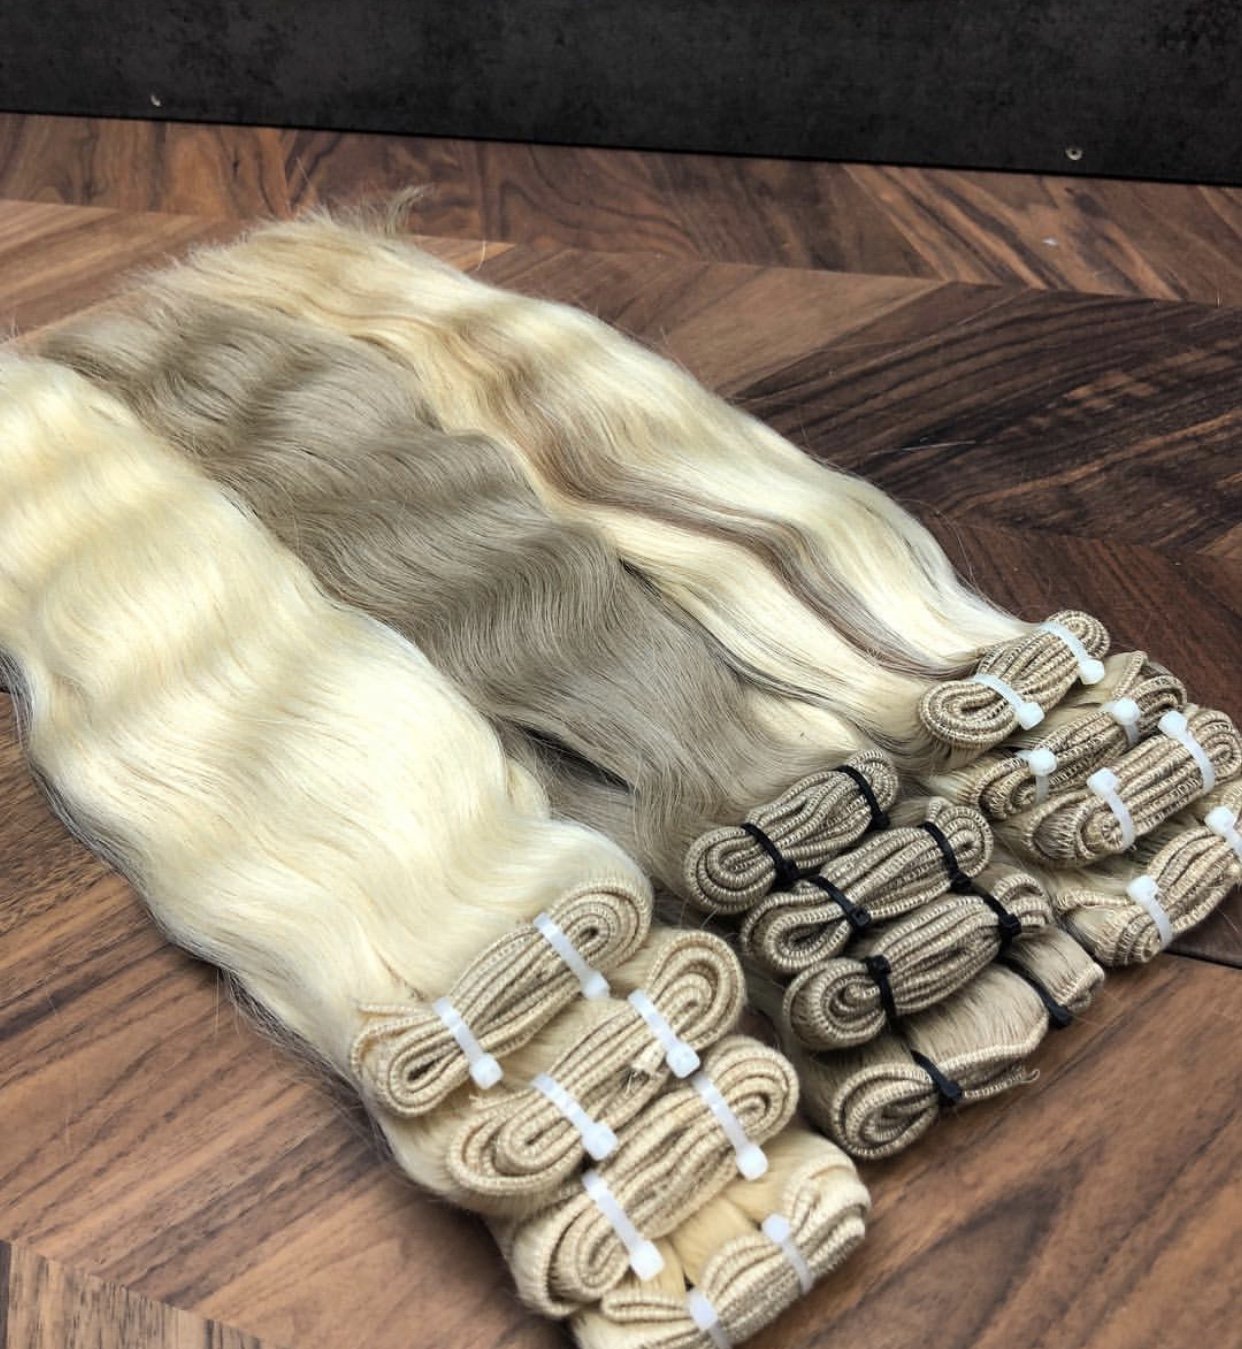 Wefts ombre 14 and 24 Color GVA hair - GVA hair